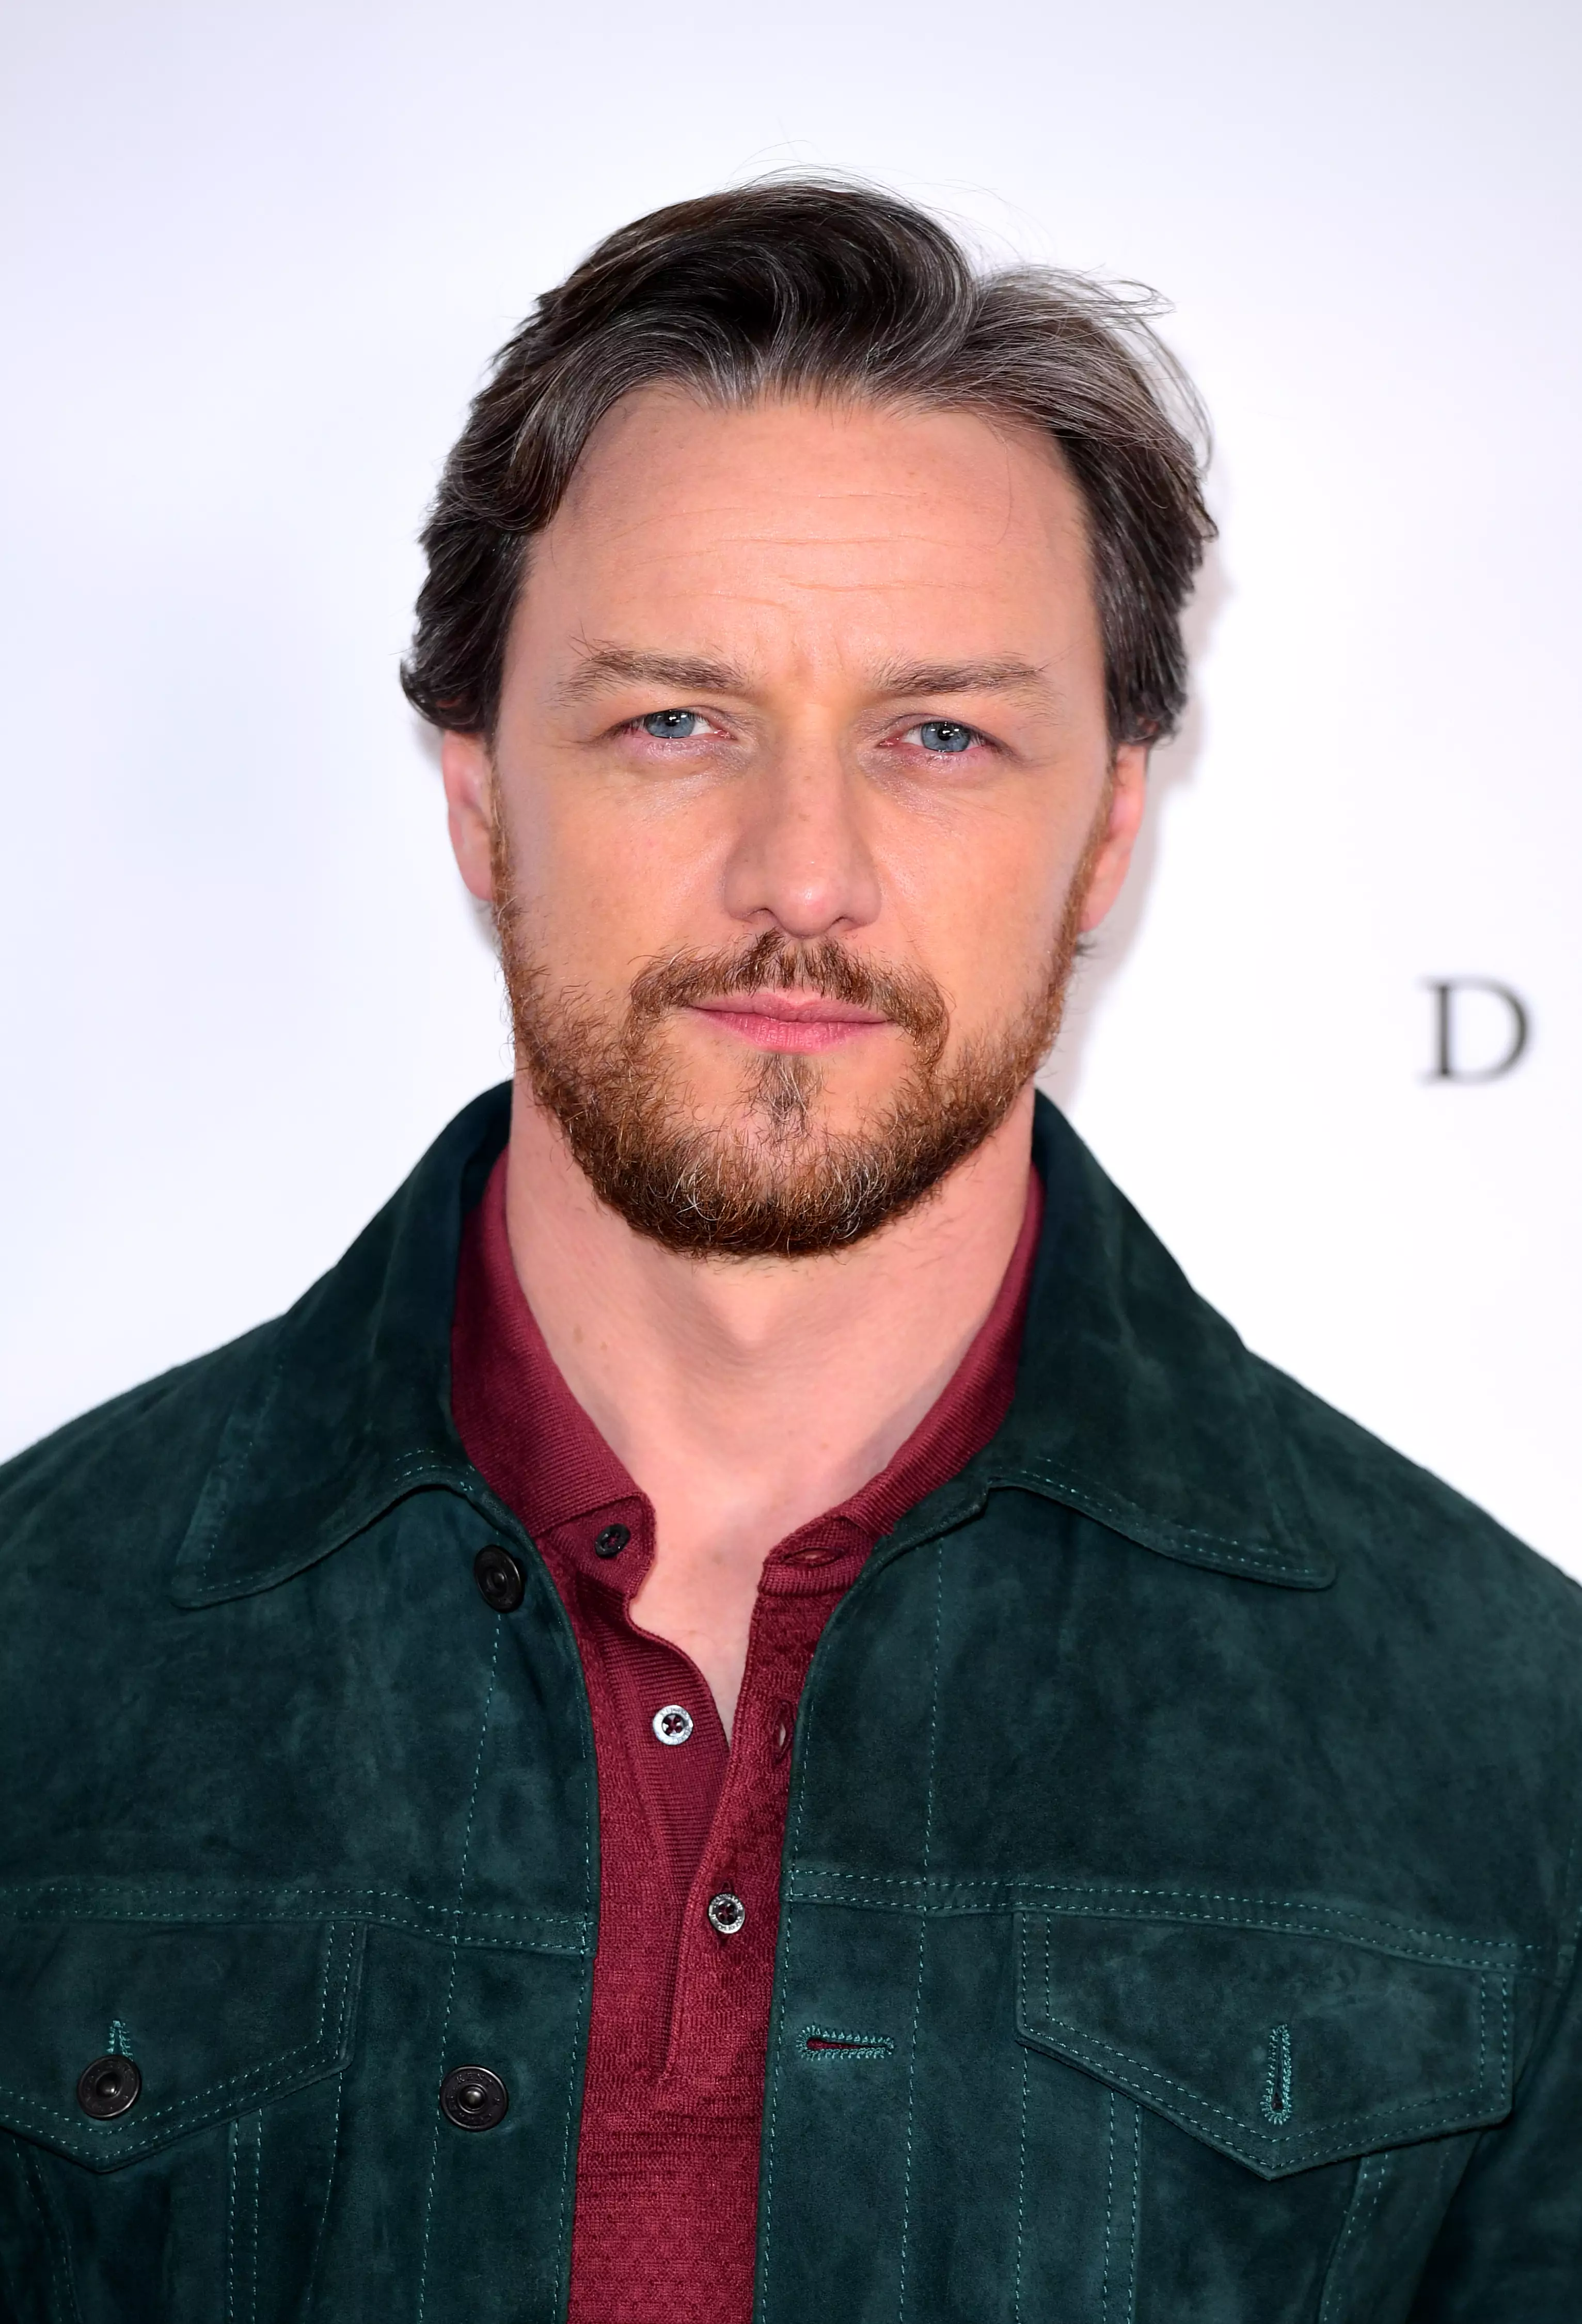 McAvoy admitted the new film gave him nightmares.